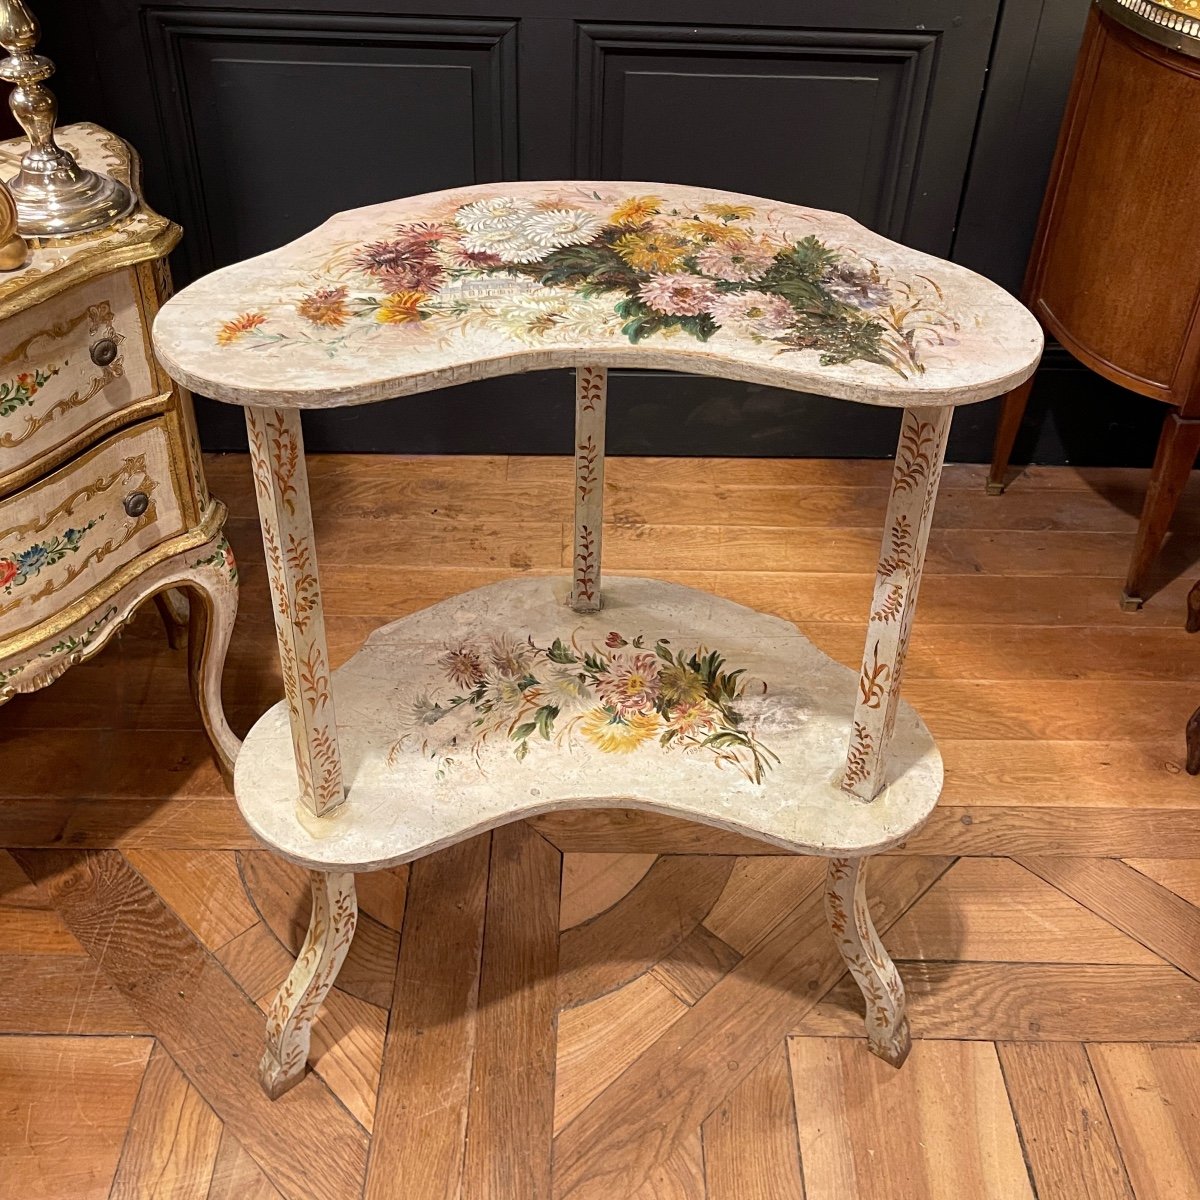 Painted Wooden Table Dated 1895